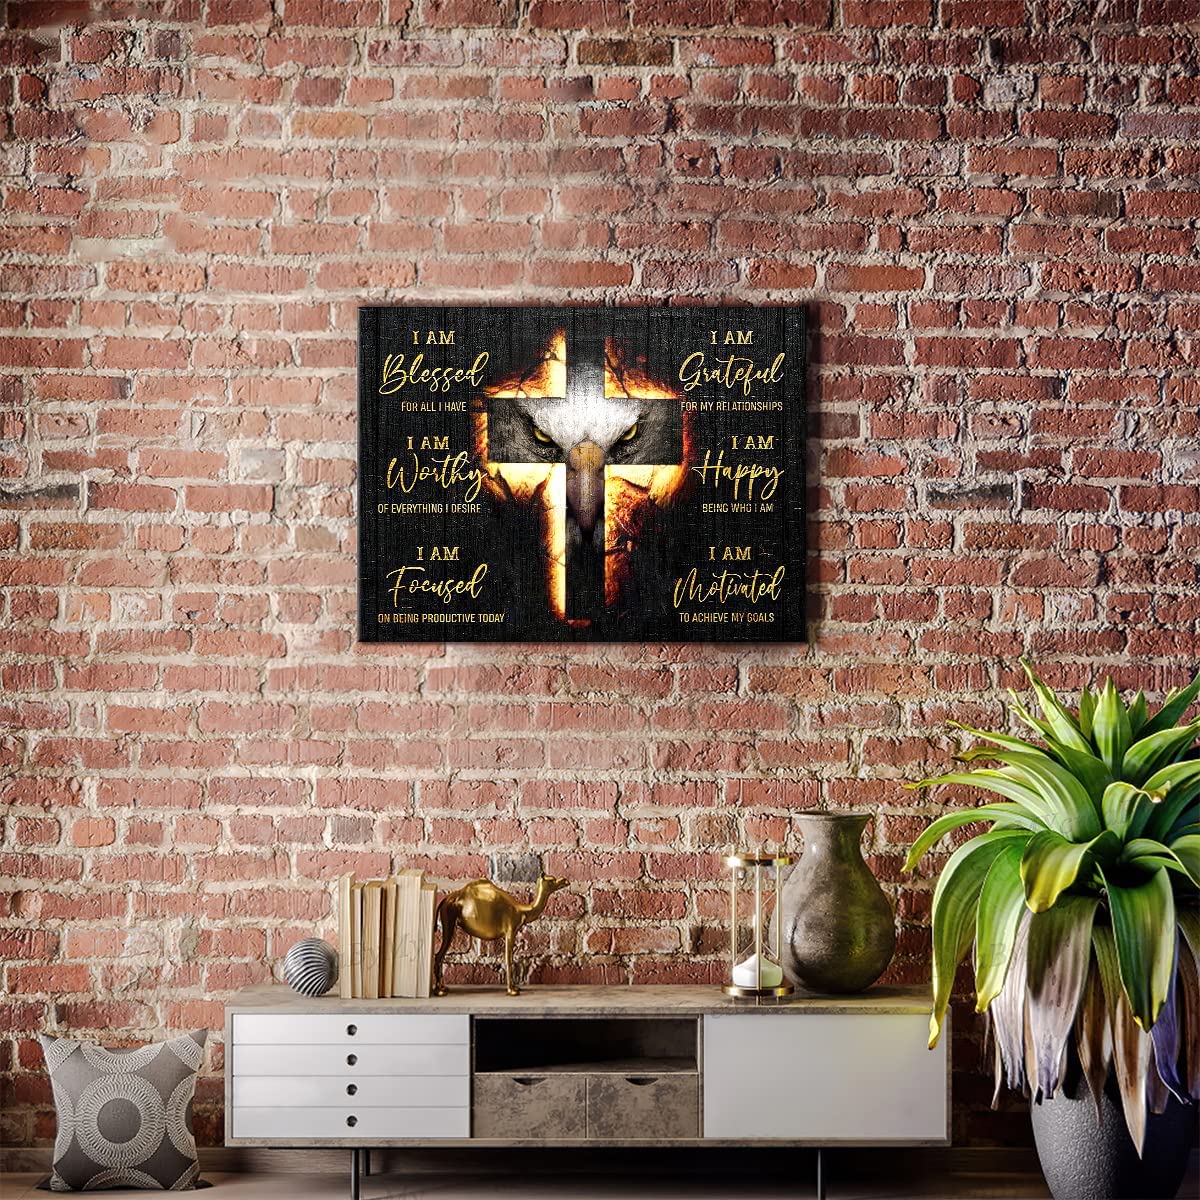 Christian Wall Art Hand Of God Quotes Wall Decor Cross Canvas Religious Jesus Painting Black Pictures Canvas Prints Motivational Framed Modern Artwork - 2